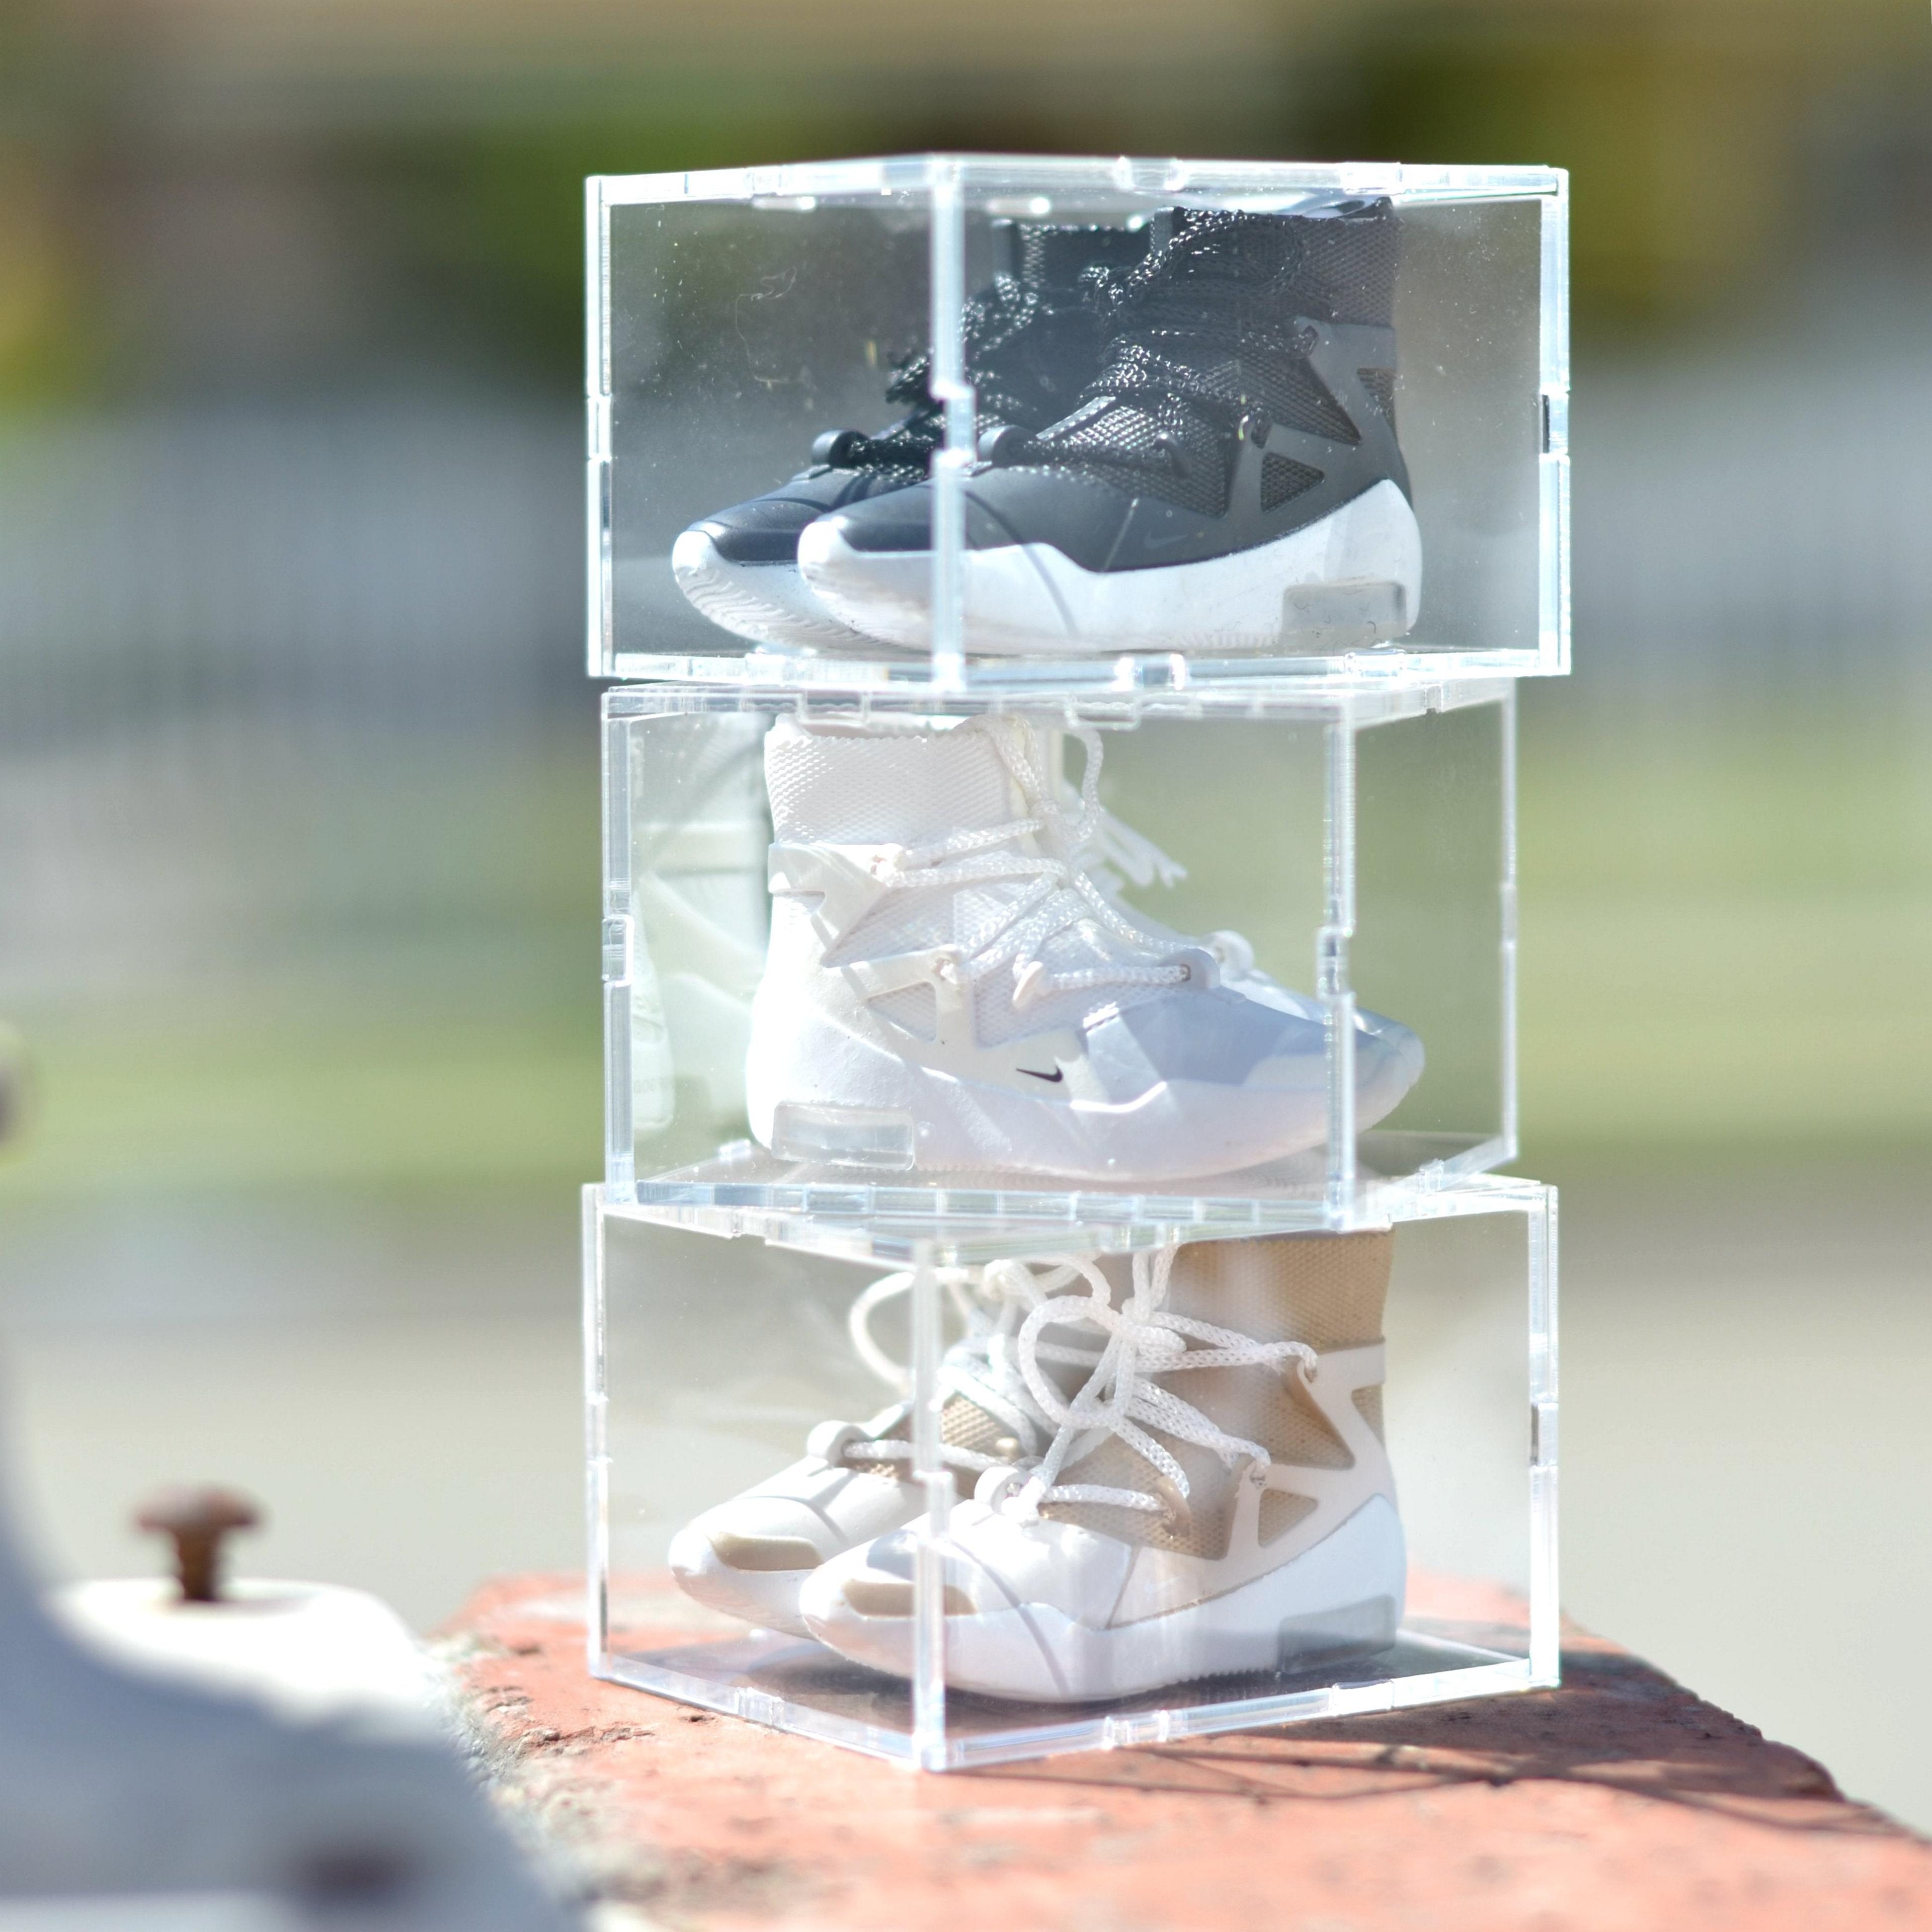 Alternate View 1 of Other Hypebeast Mini Sneakers Collection with Display Storage Ca